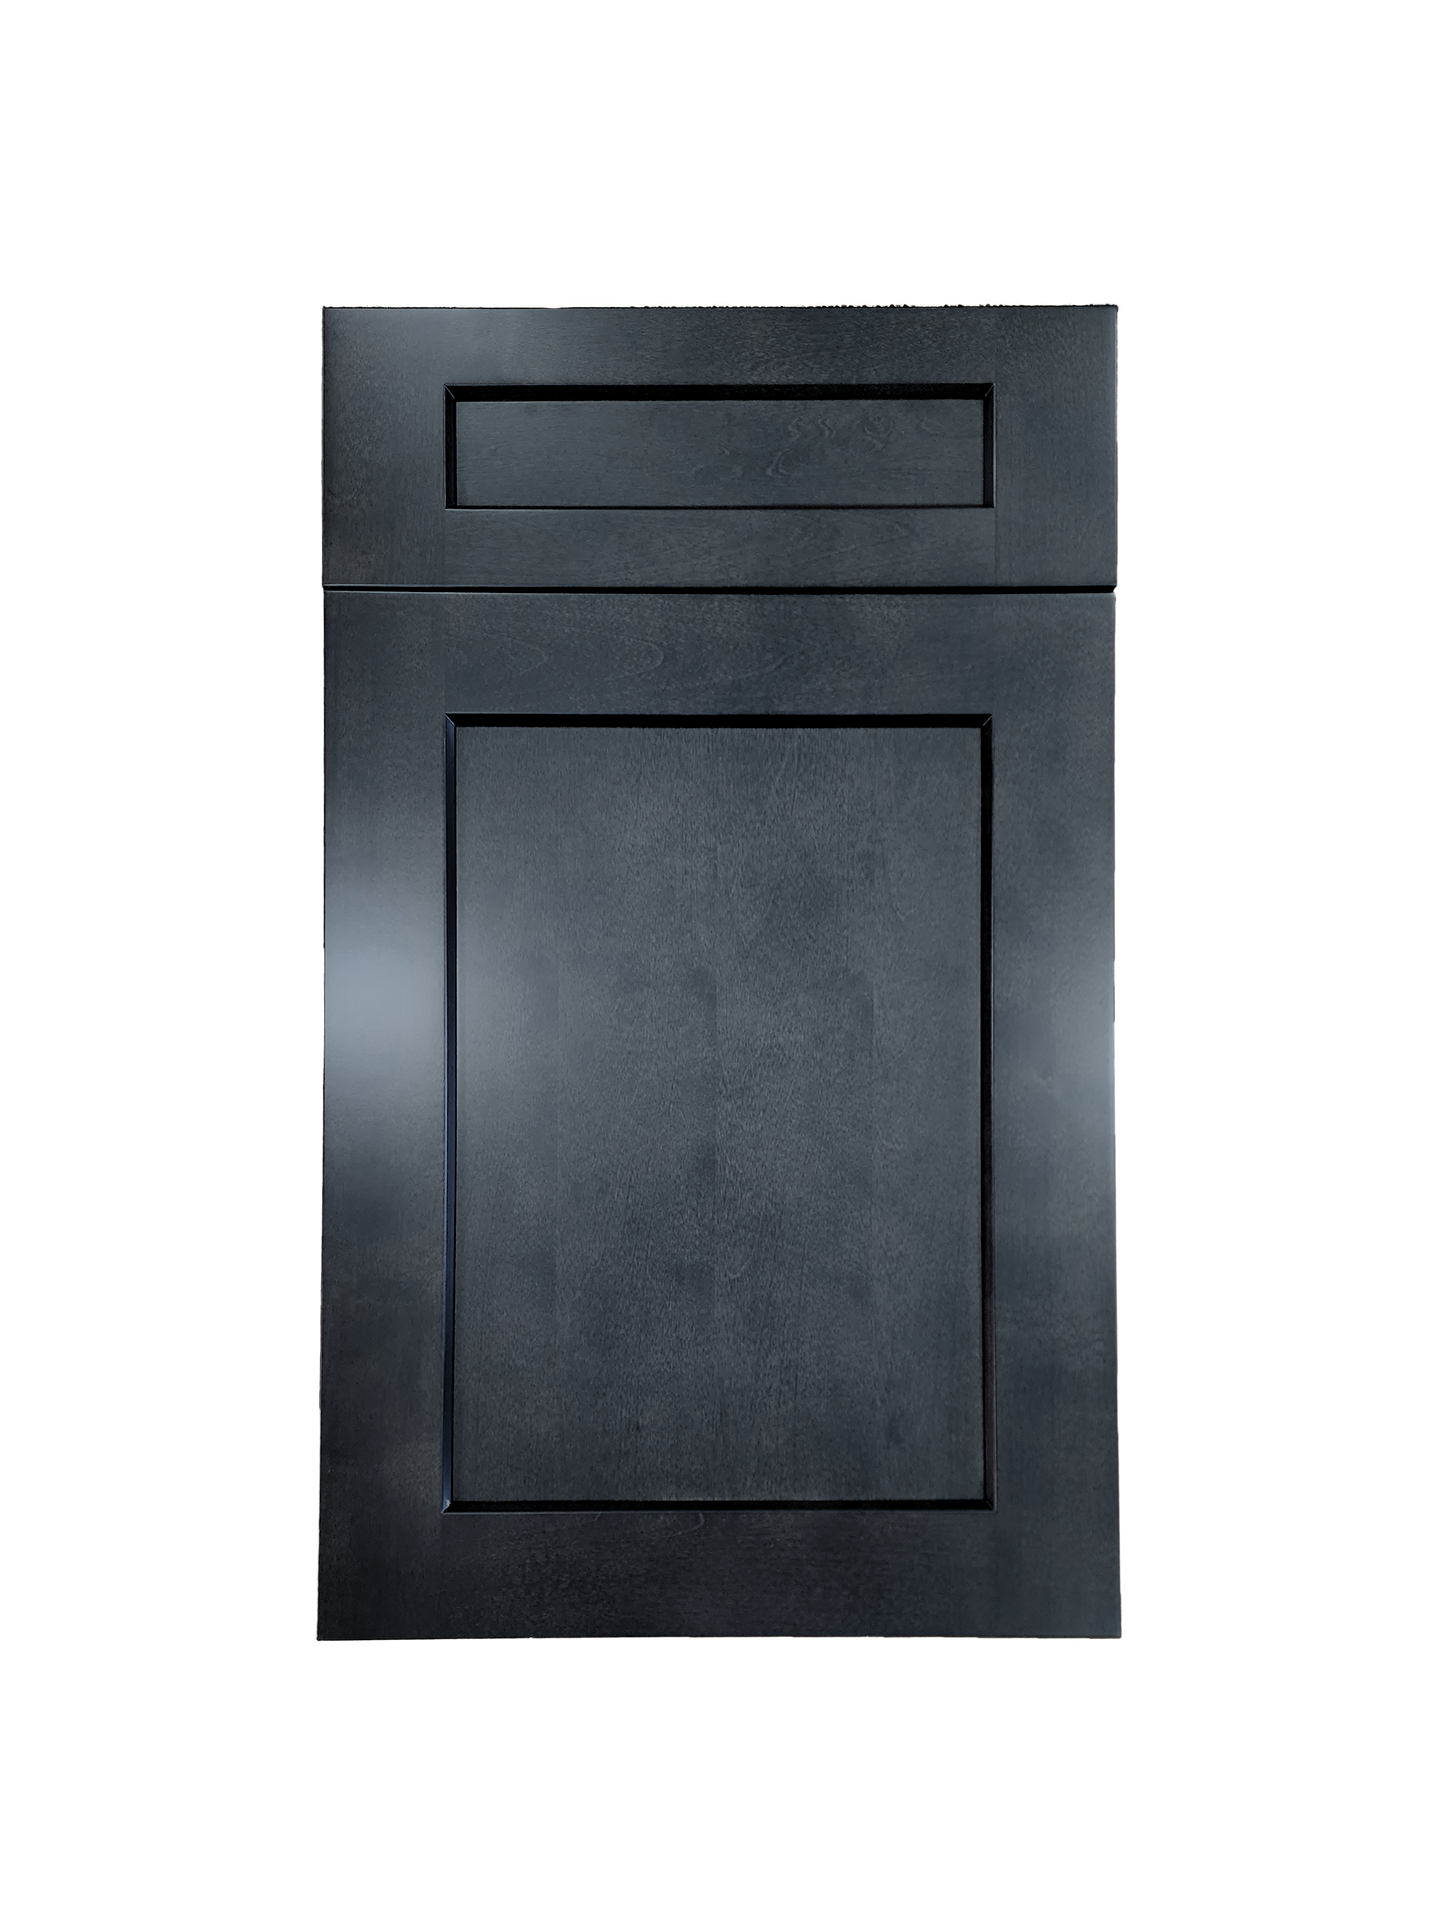 Stormy Grey Wall Cabinet 27 inches wide 12 inches deep 42 inches tall with Stormy Grey box and Stormy Grey doors